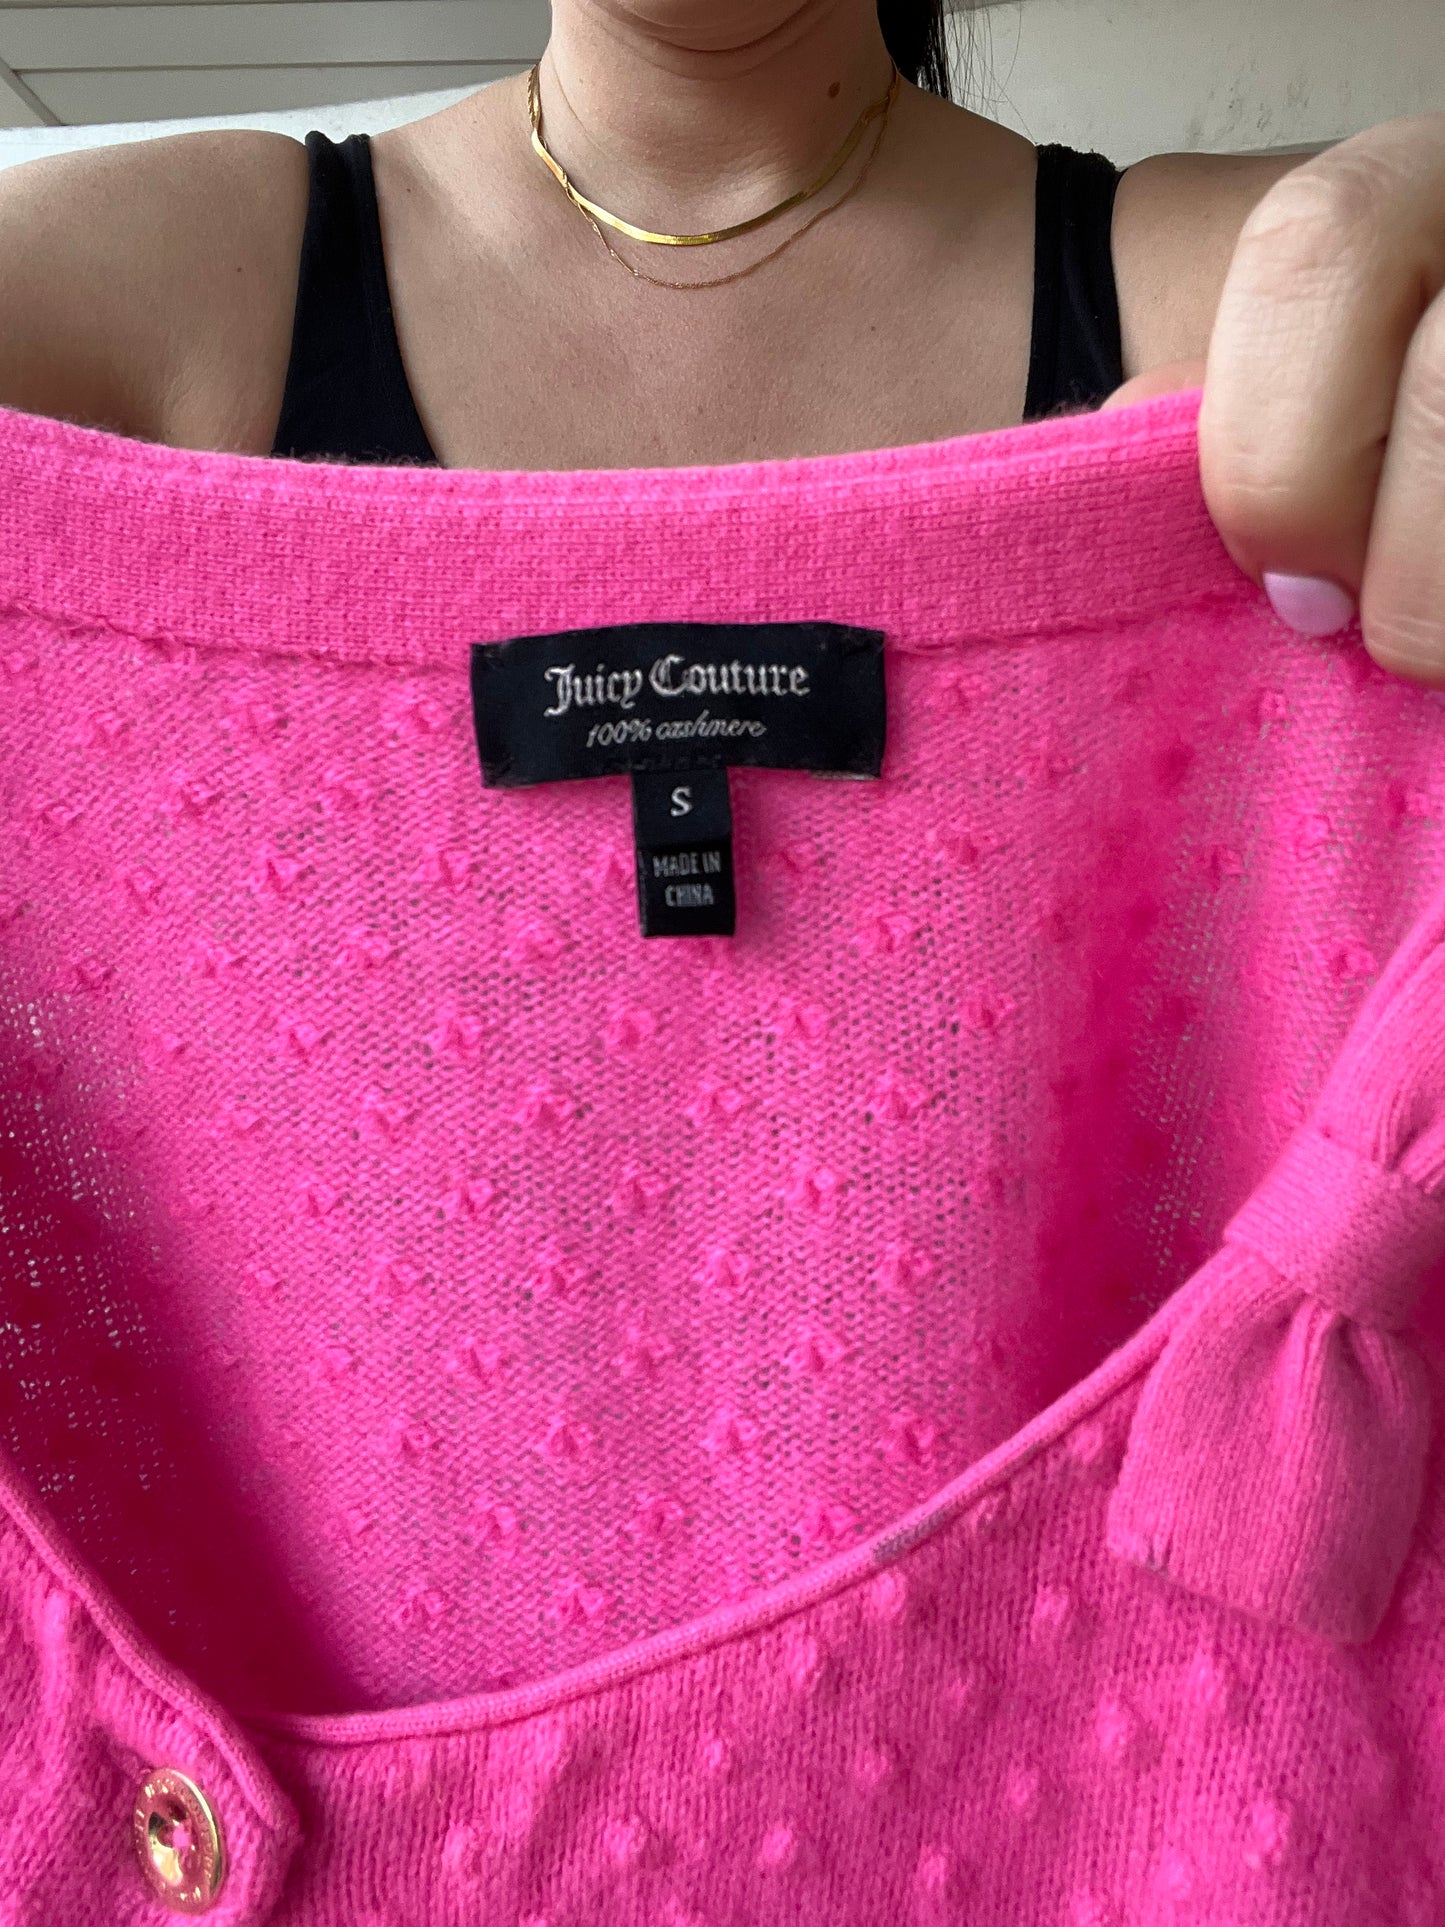 Juicy Couture Cashmere - Size S